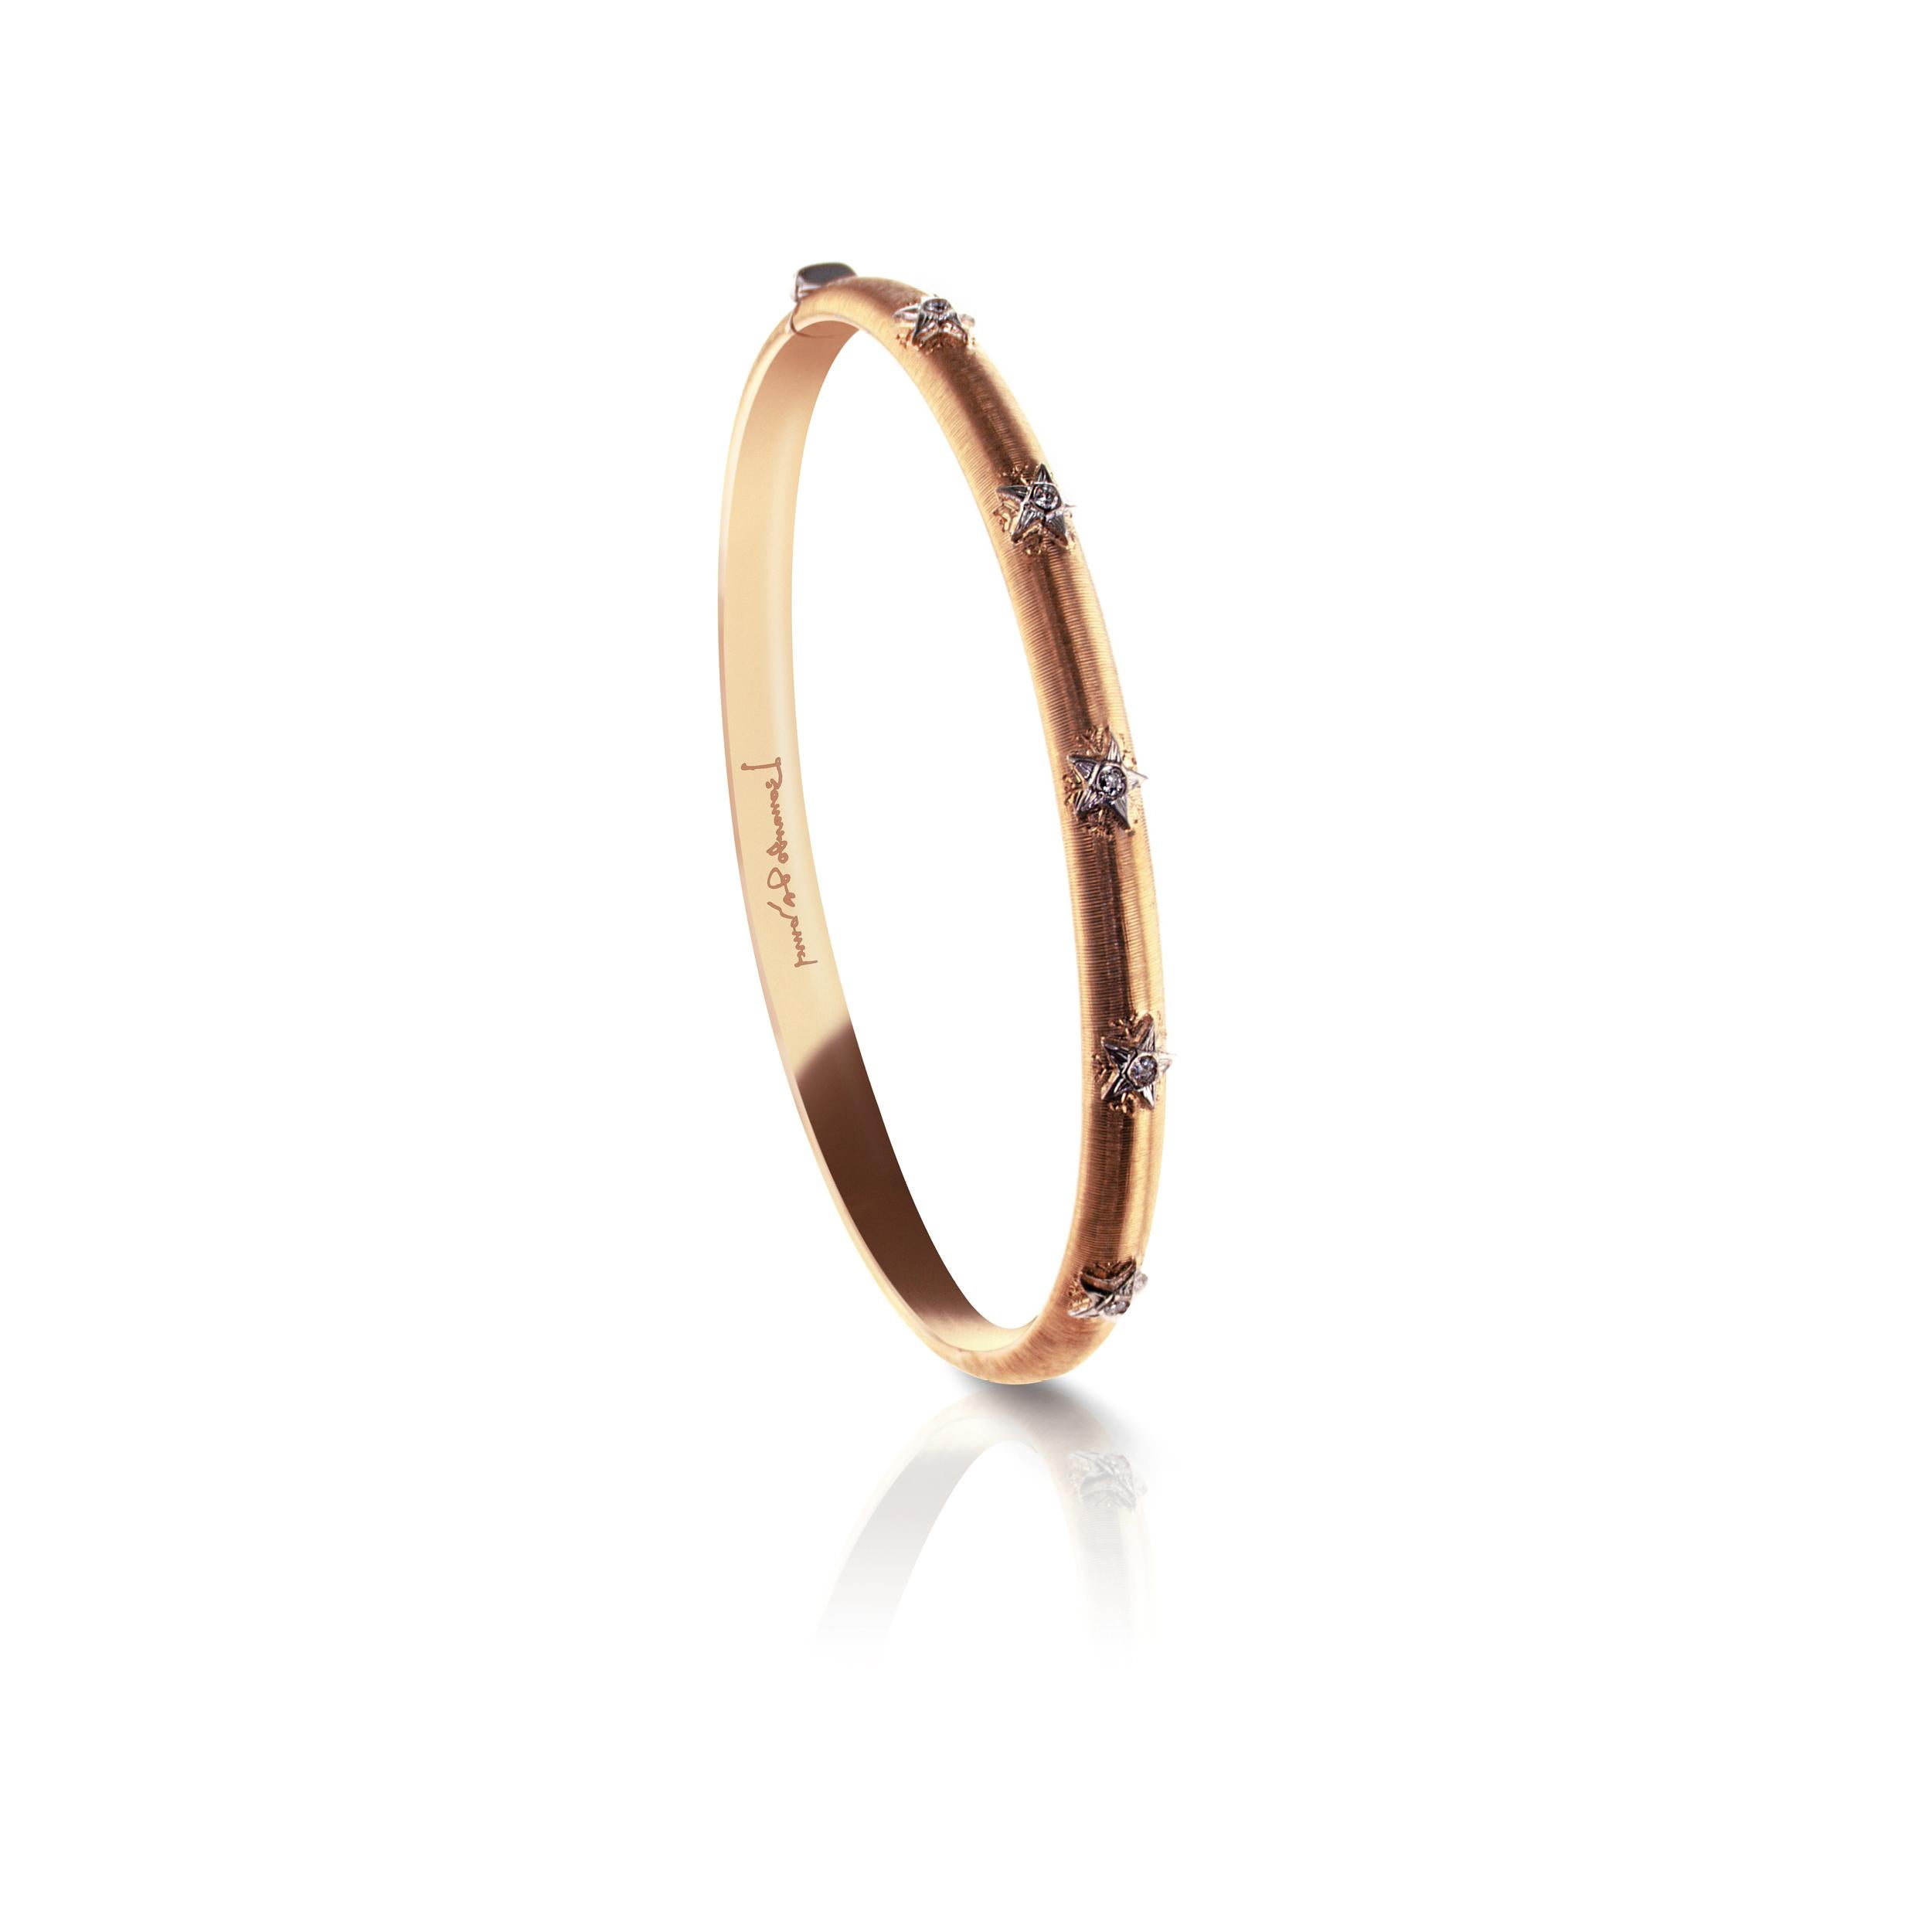 This 18Kt Rose Gold Caterina bangle was designed and inspired by Leonardo da Vinci's architectural drawings.

A thin bangle which is elegantly decorated with 5 white Gold stars on the side of the bangle facing up. Each star holds an internationally